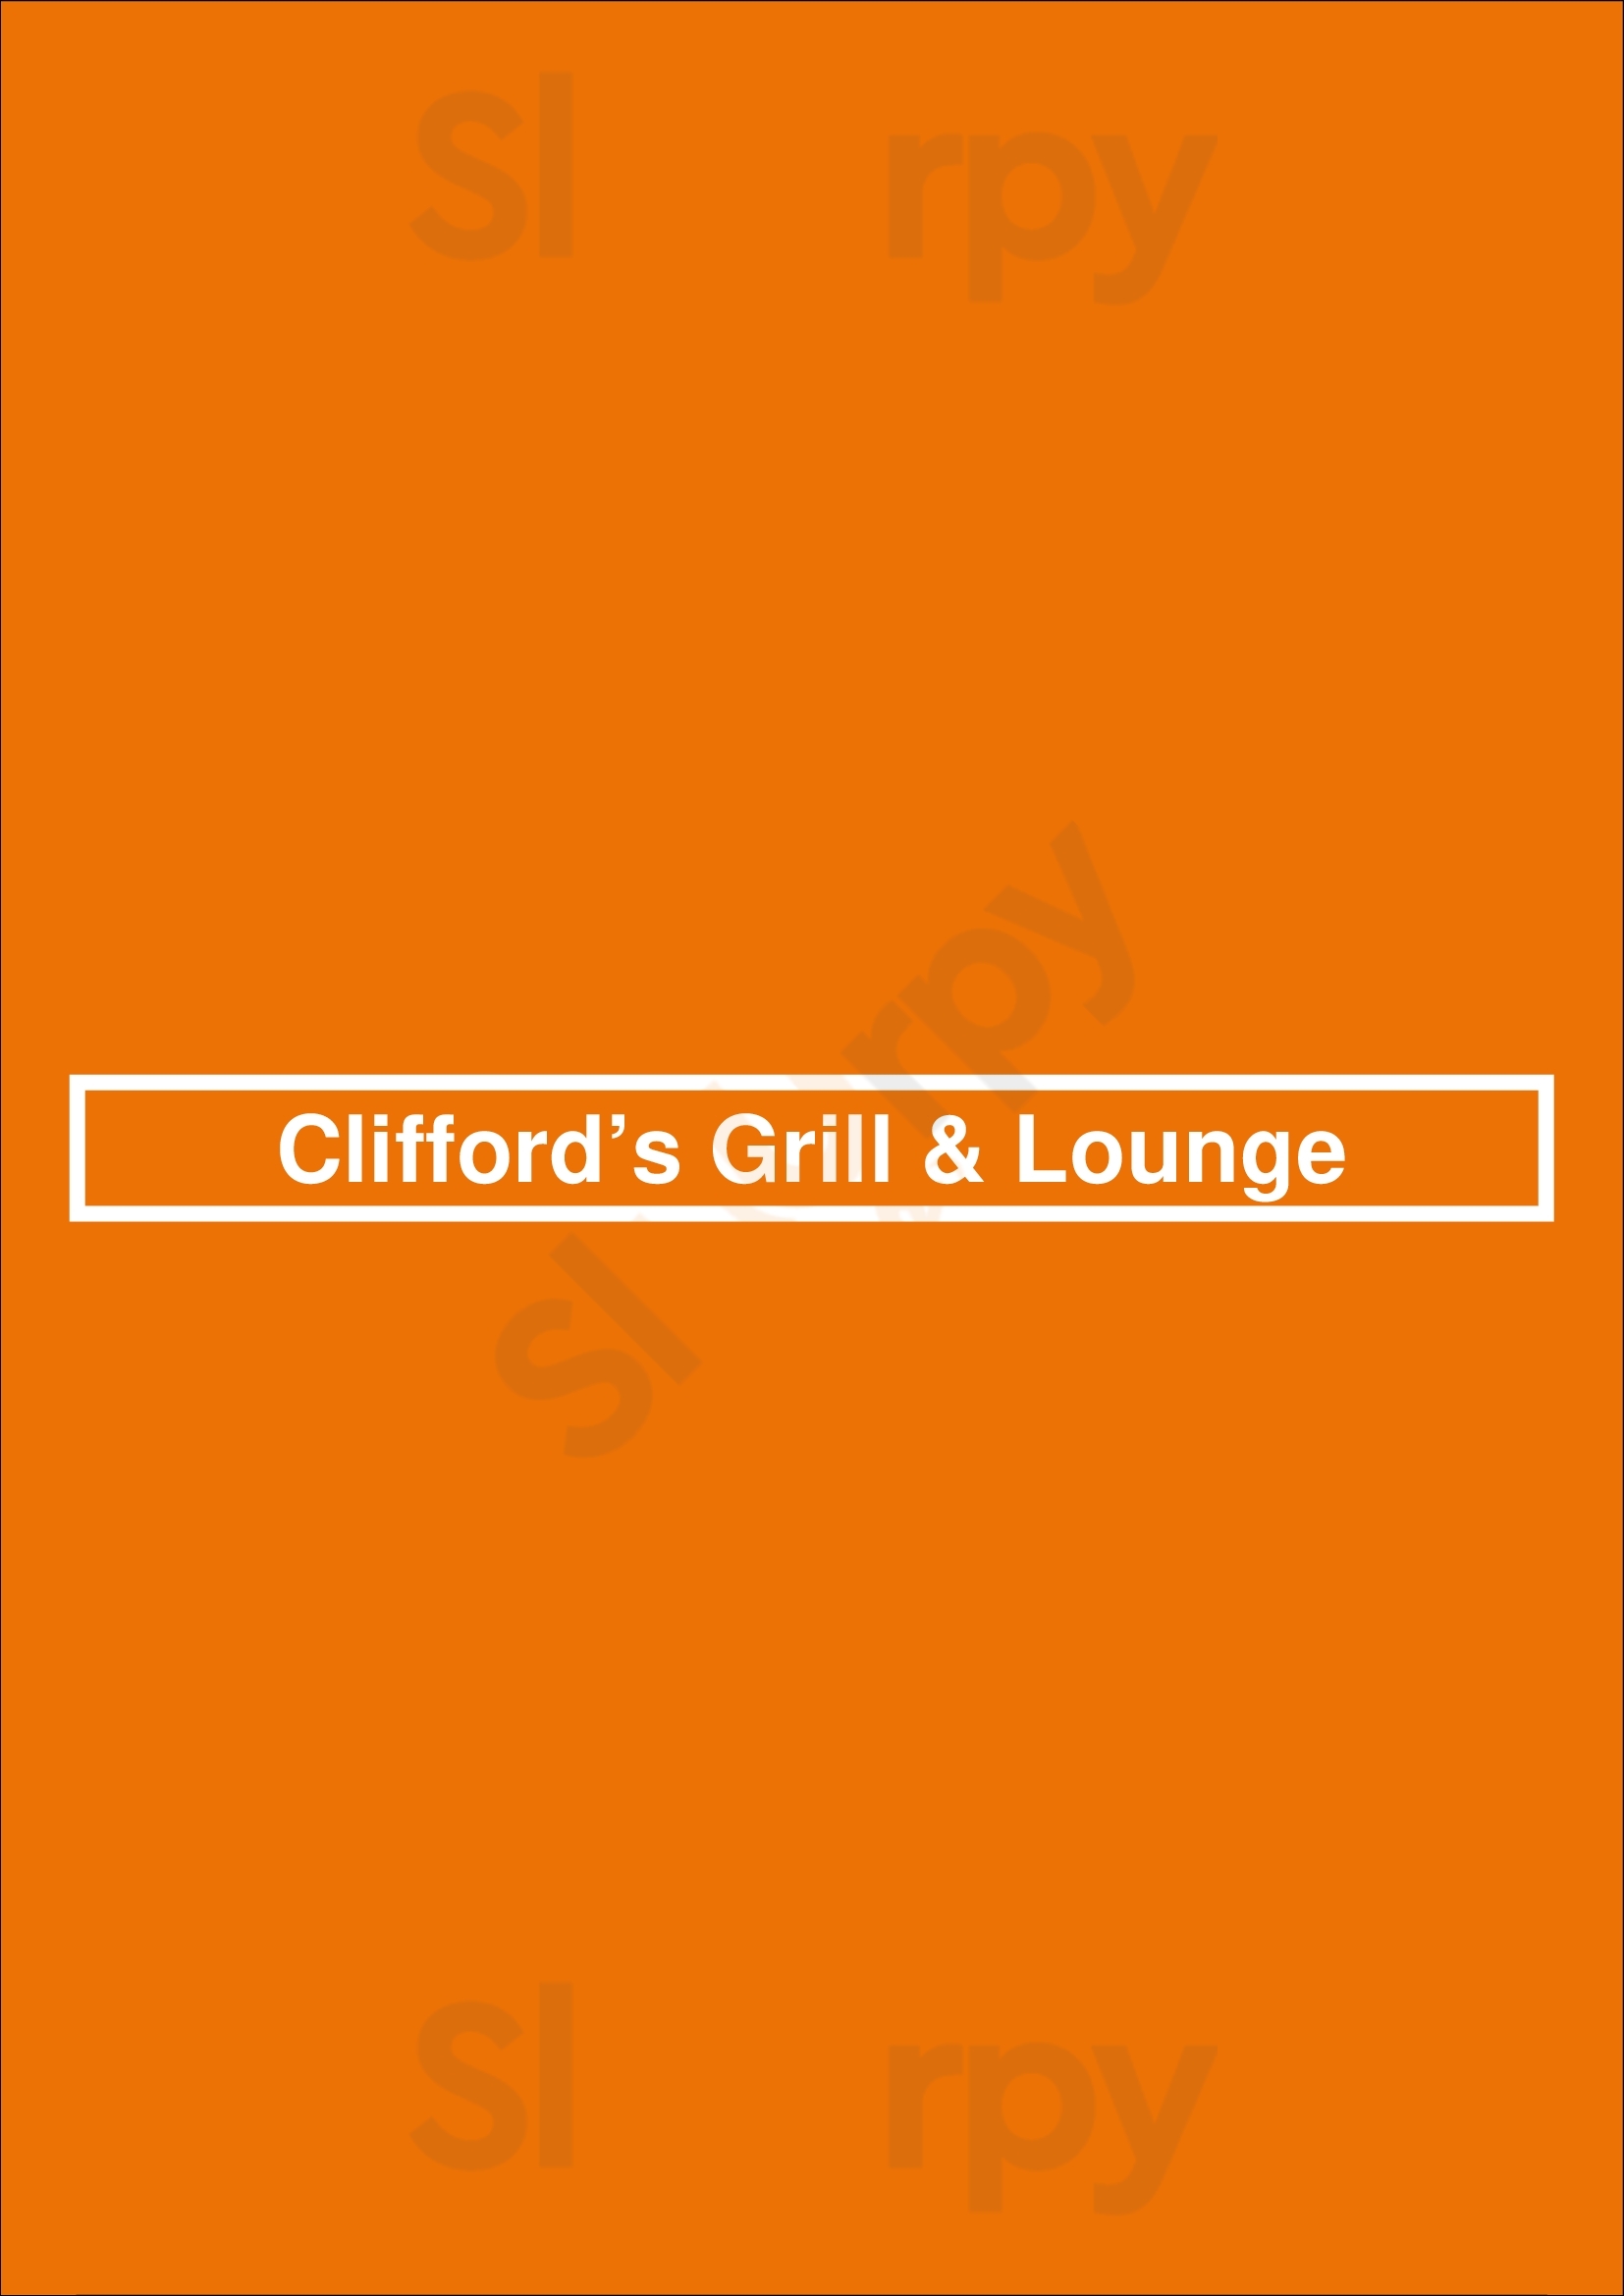 Clifford’s Grill & Lounge Surfers Paradise Menu - 1